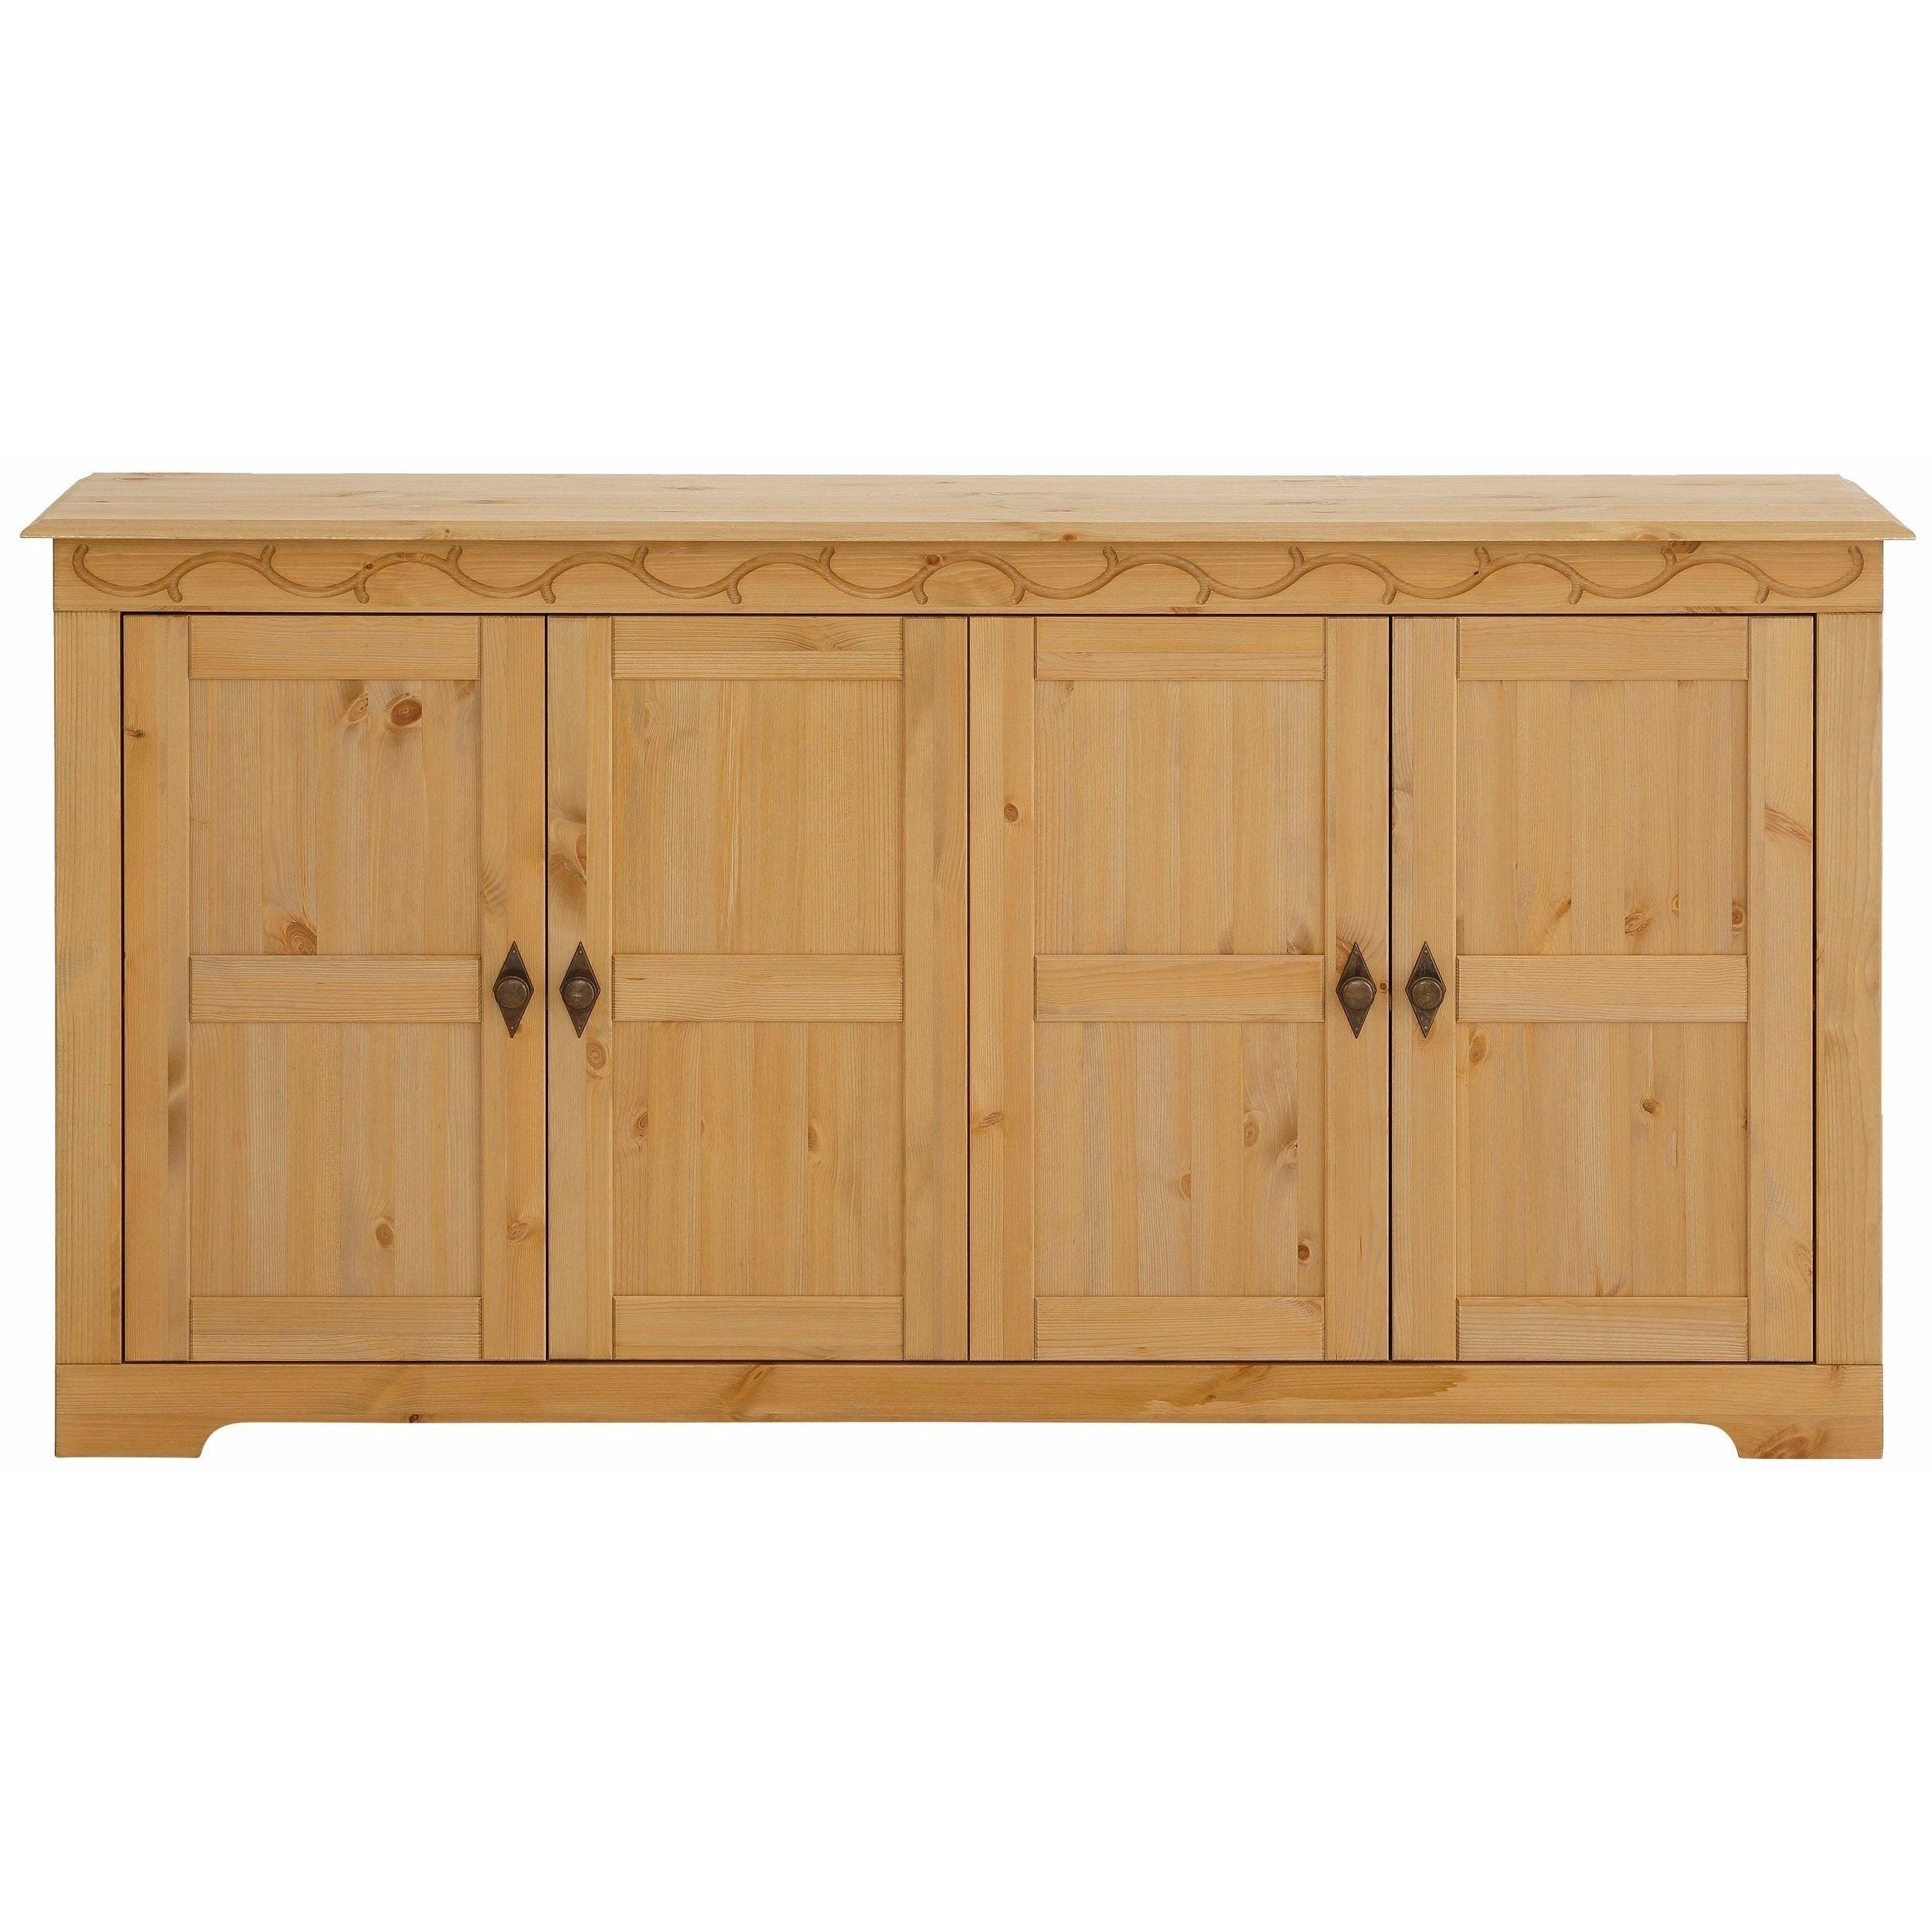 Shop Lando 4 Door Sideboard, Solid Pine, Natural – Free Shipping With Regard To Most Recently Released Natural South Pine Sideboards (View 6 of 20)